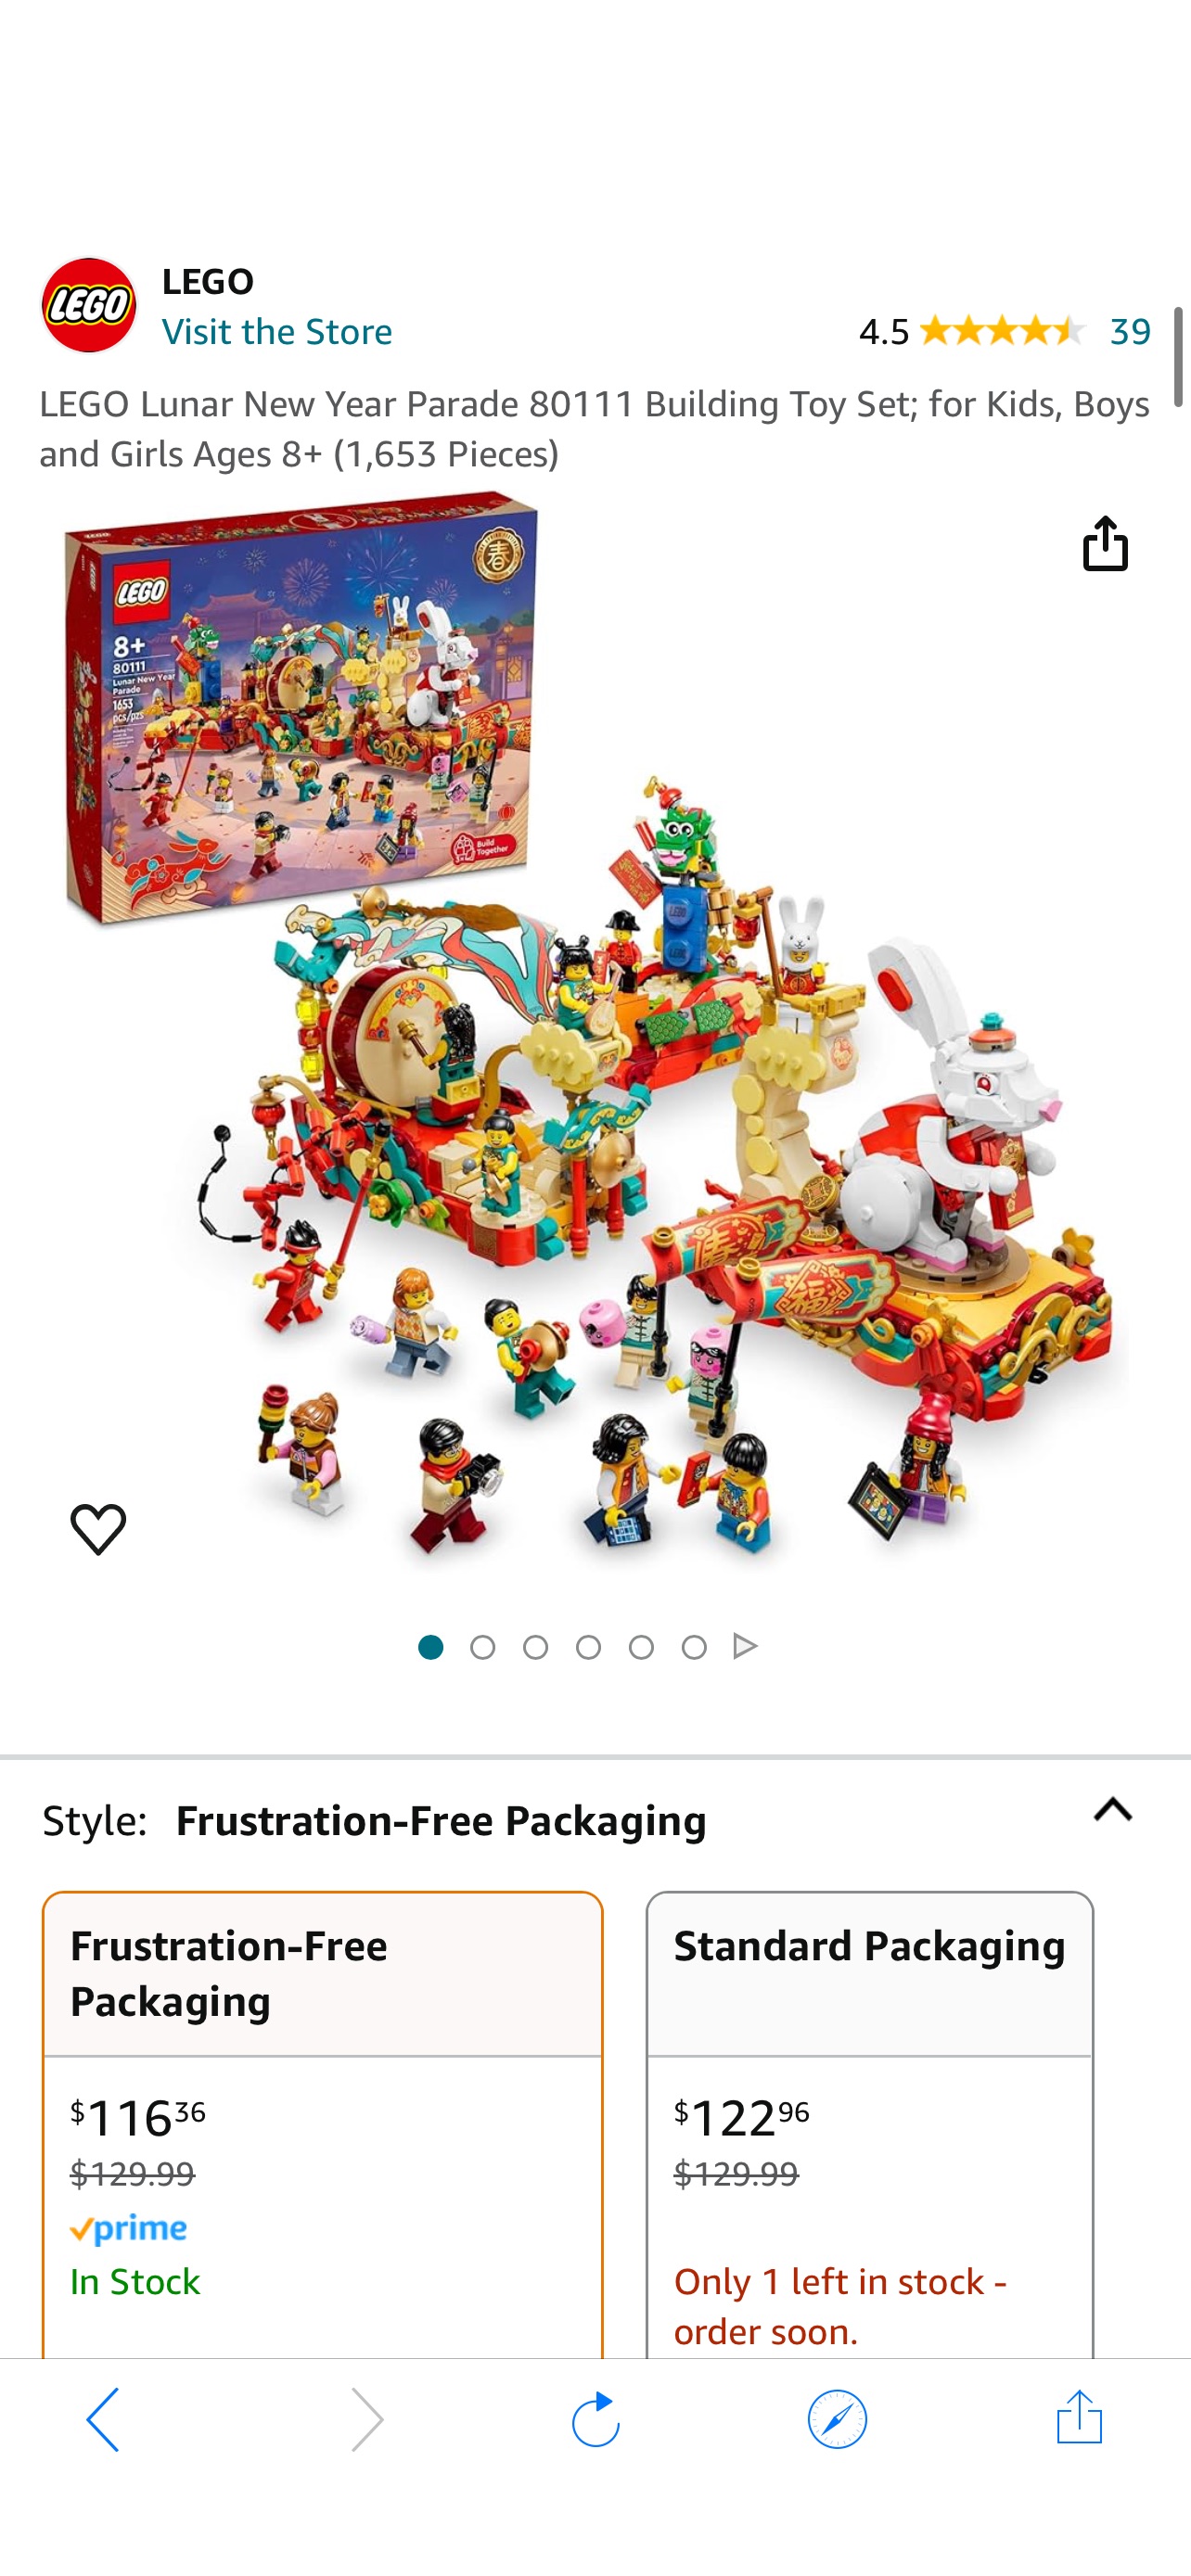 Amazon.com: LEGO Lunar New Year Parade 80111 Building Toy Set; for Kids, Boys and Girls Ages 8+ (1,653 Pieces) : Toys & Games乐高花车游行 降价